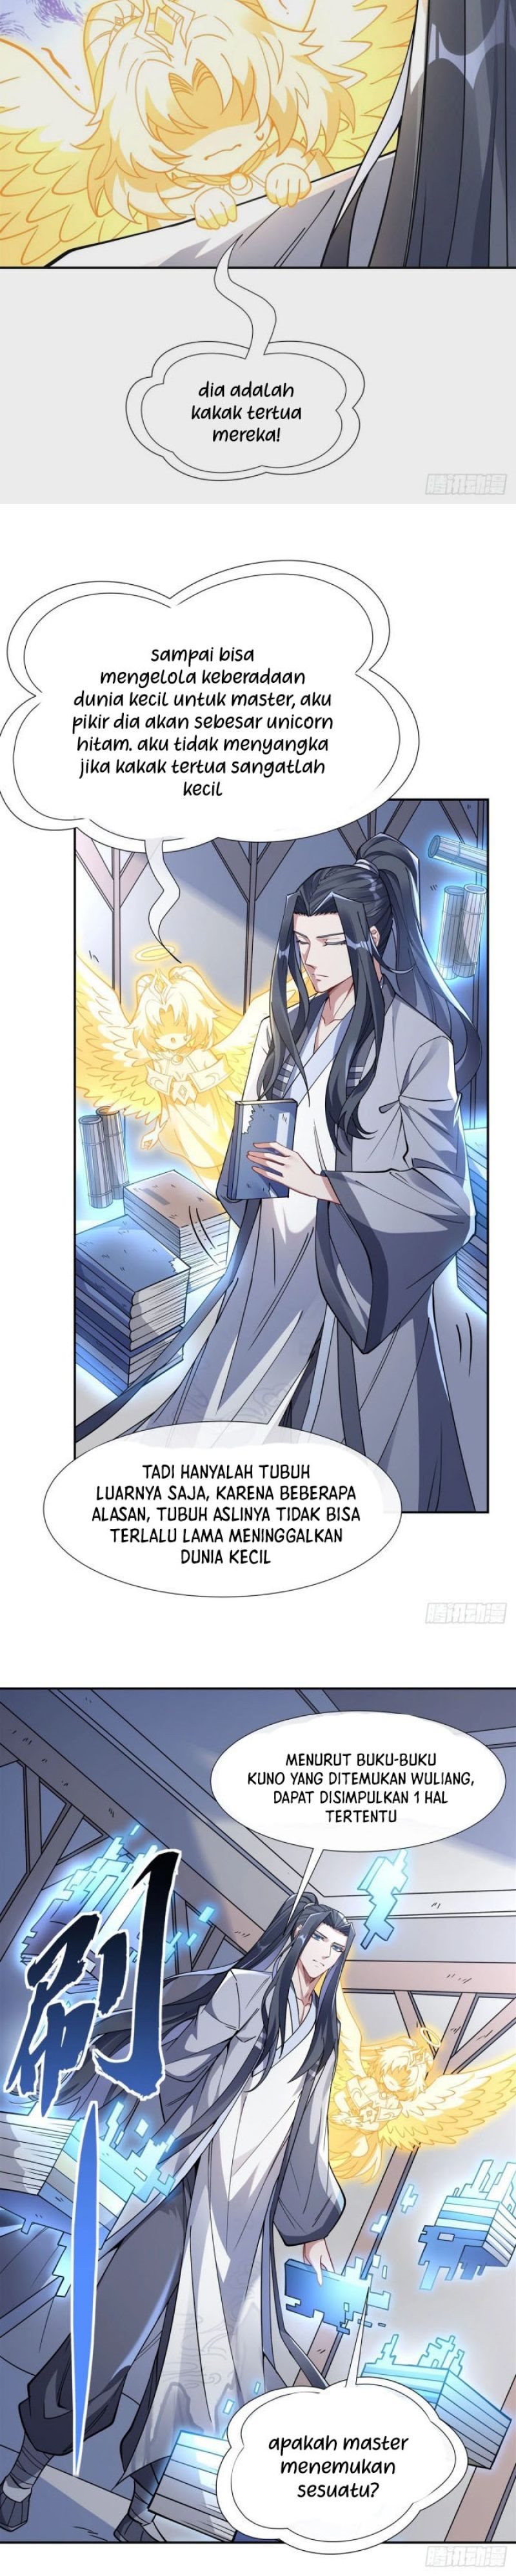 Dilarang COPAS - situs resmi www.mangacanblog.com - Komik my female apprentices are all big shots from the future 127 - chapter 127 128 Indonesia my female apprentices are all big shots from the future 127 - chapter 127 Terbaru 11|Baca Manga Komik Indonesia|Mangacan